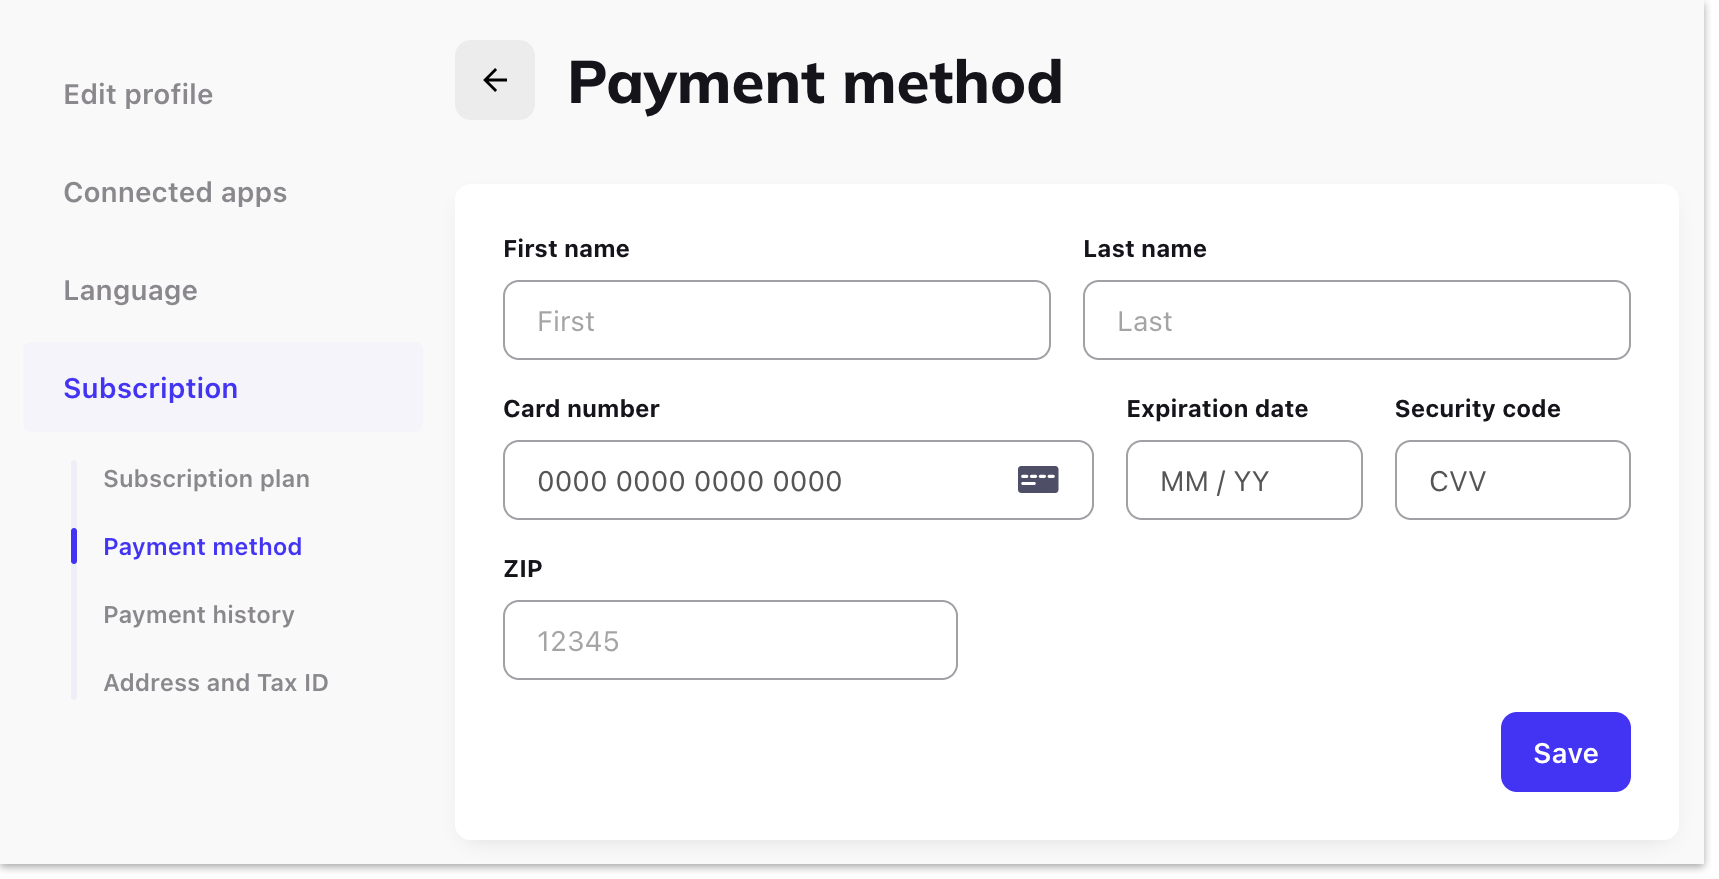 mmhmm_accounts_page_payment_method_screen.png